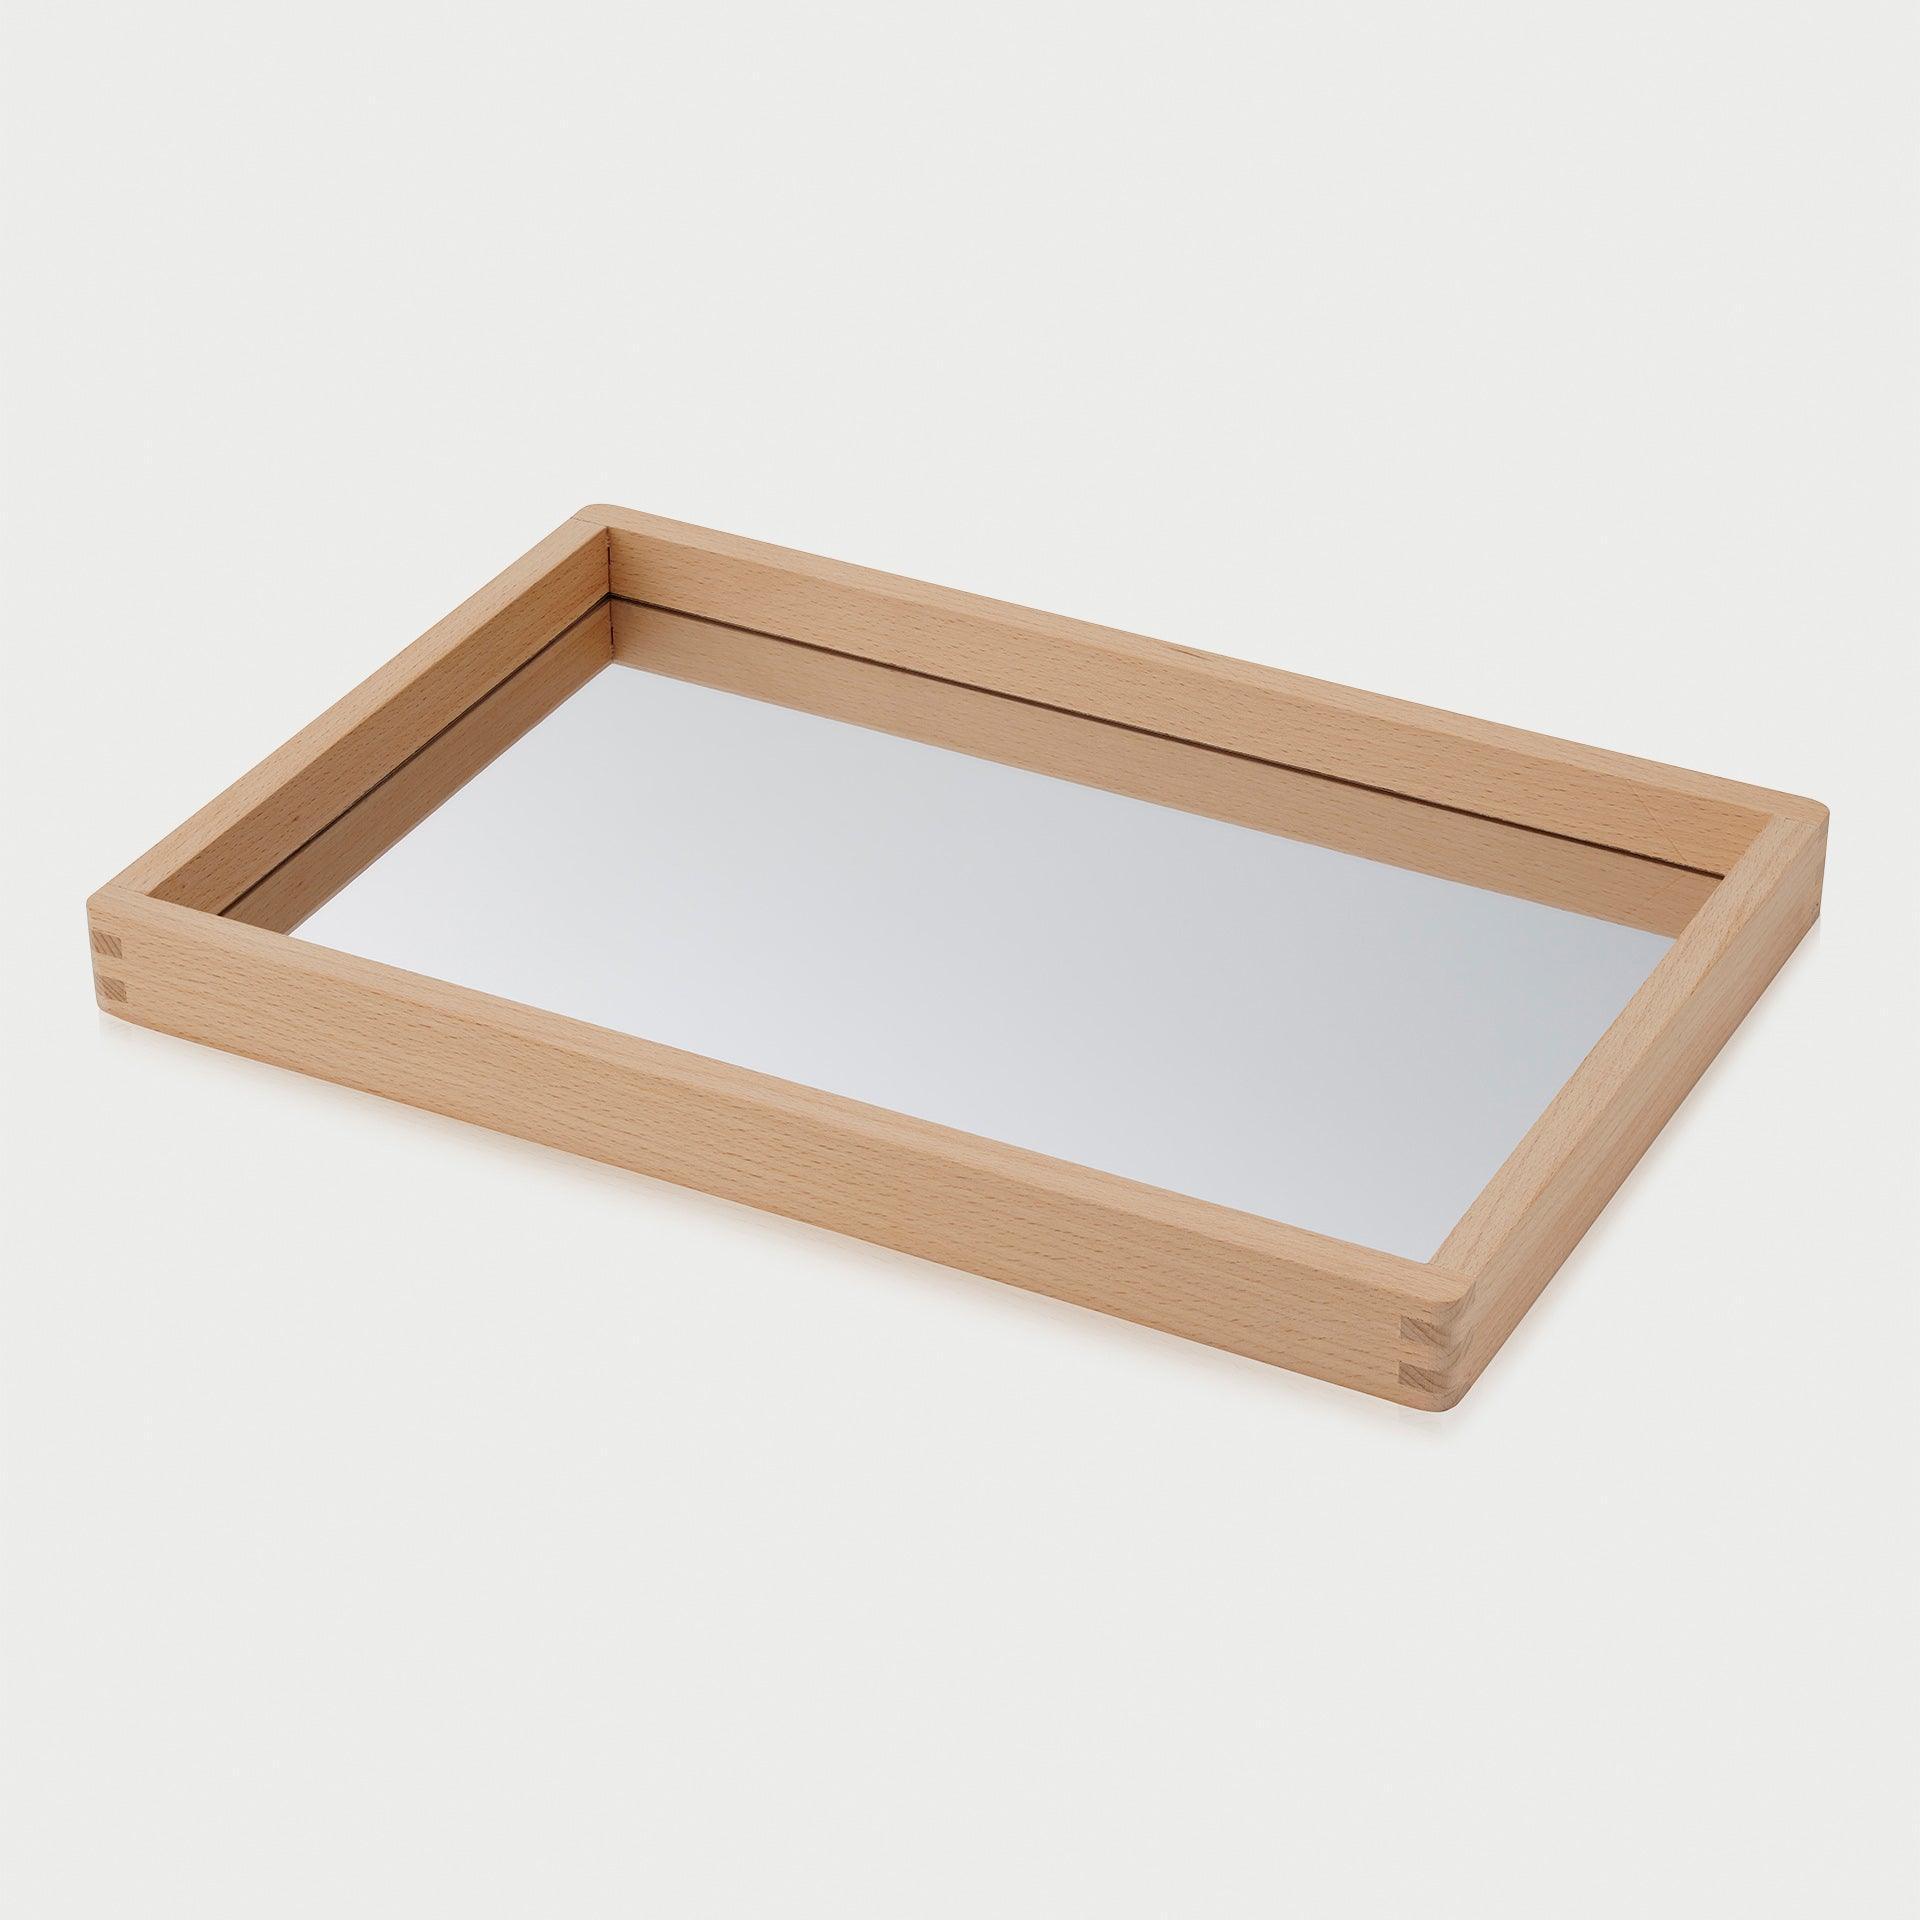 Tickit: Small mirror of Small Wooden Mirror Tray explorers